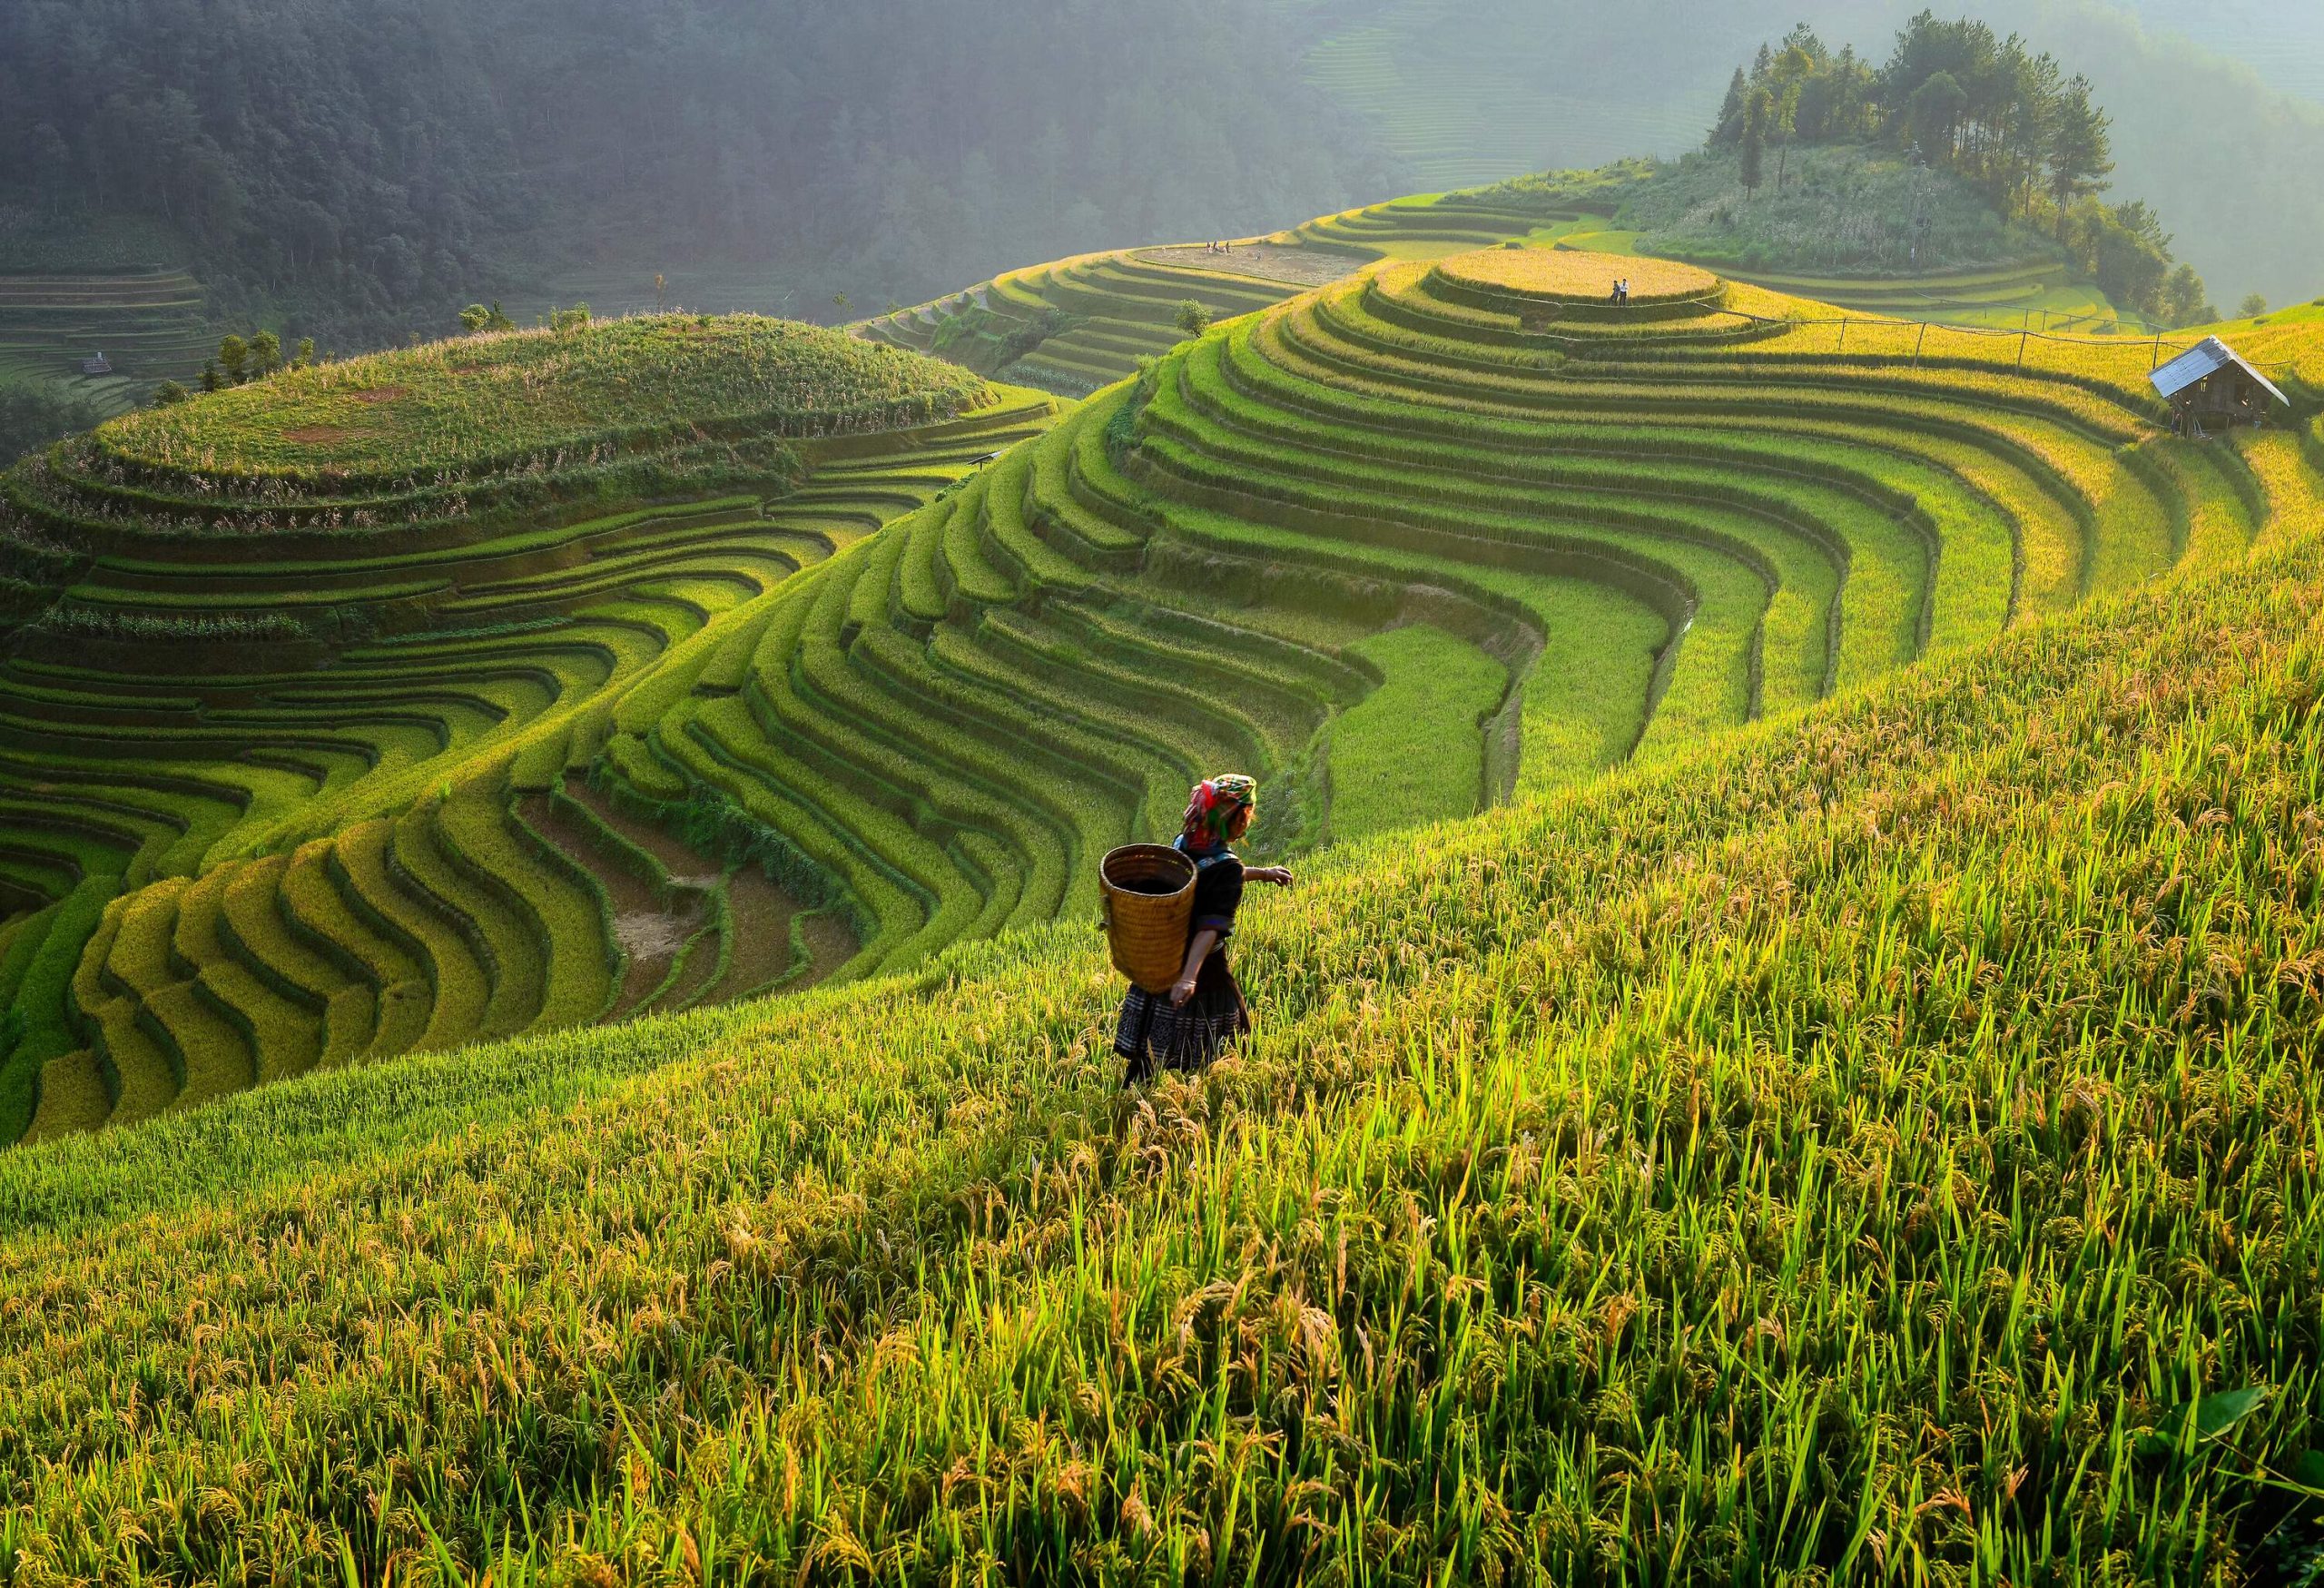 A magnificent terraced rice field stretches across the landscape, with a diligent farmer ascending the mountain in the foreground.